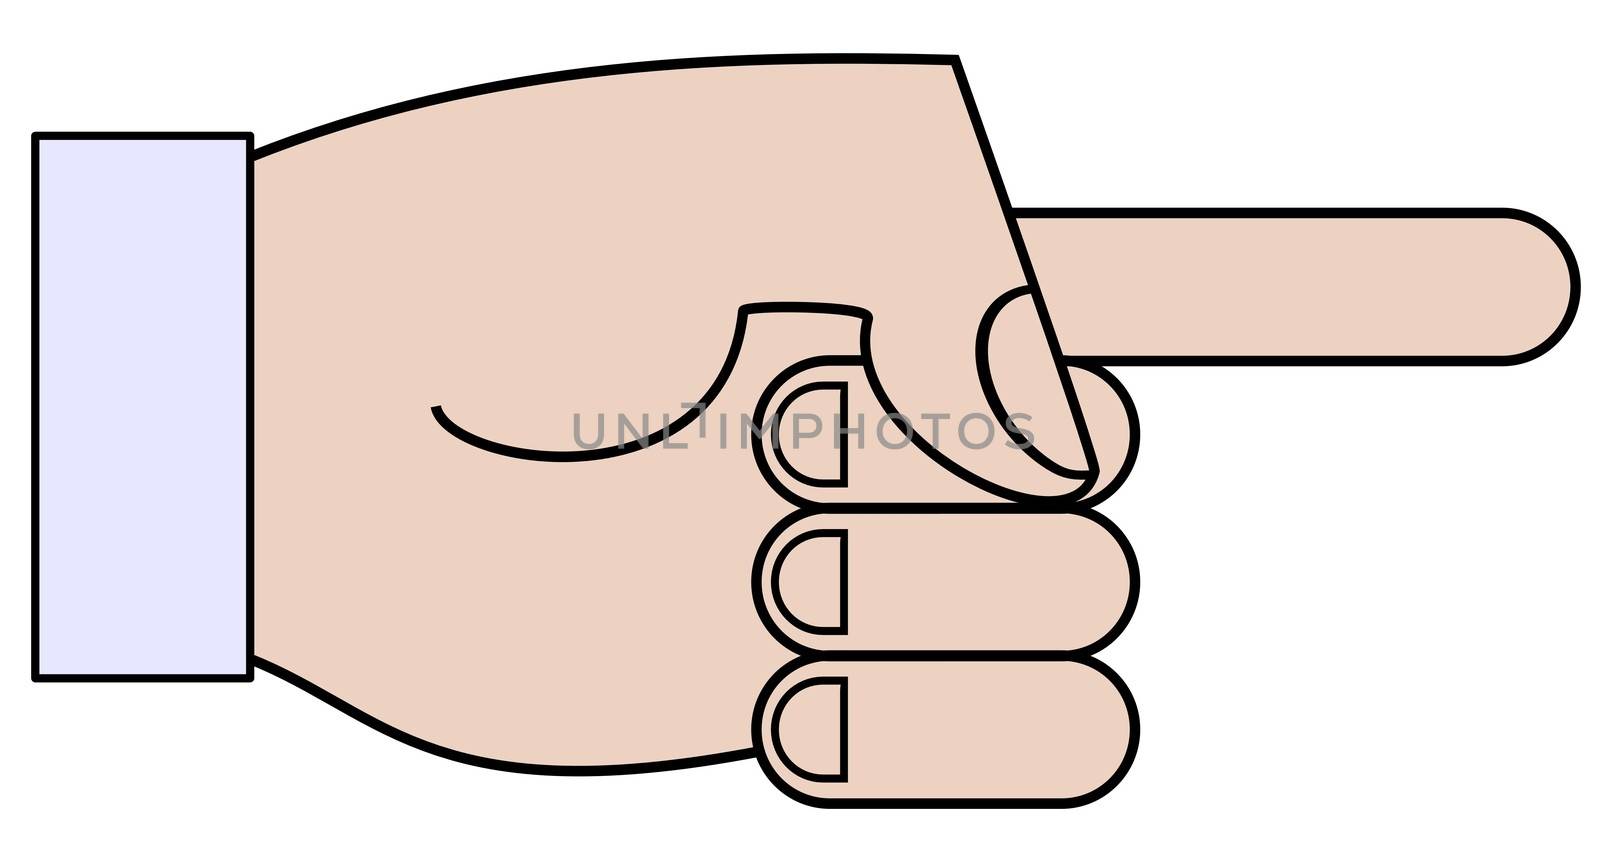 Illustration of a cartoon hand pointing